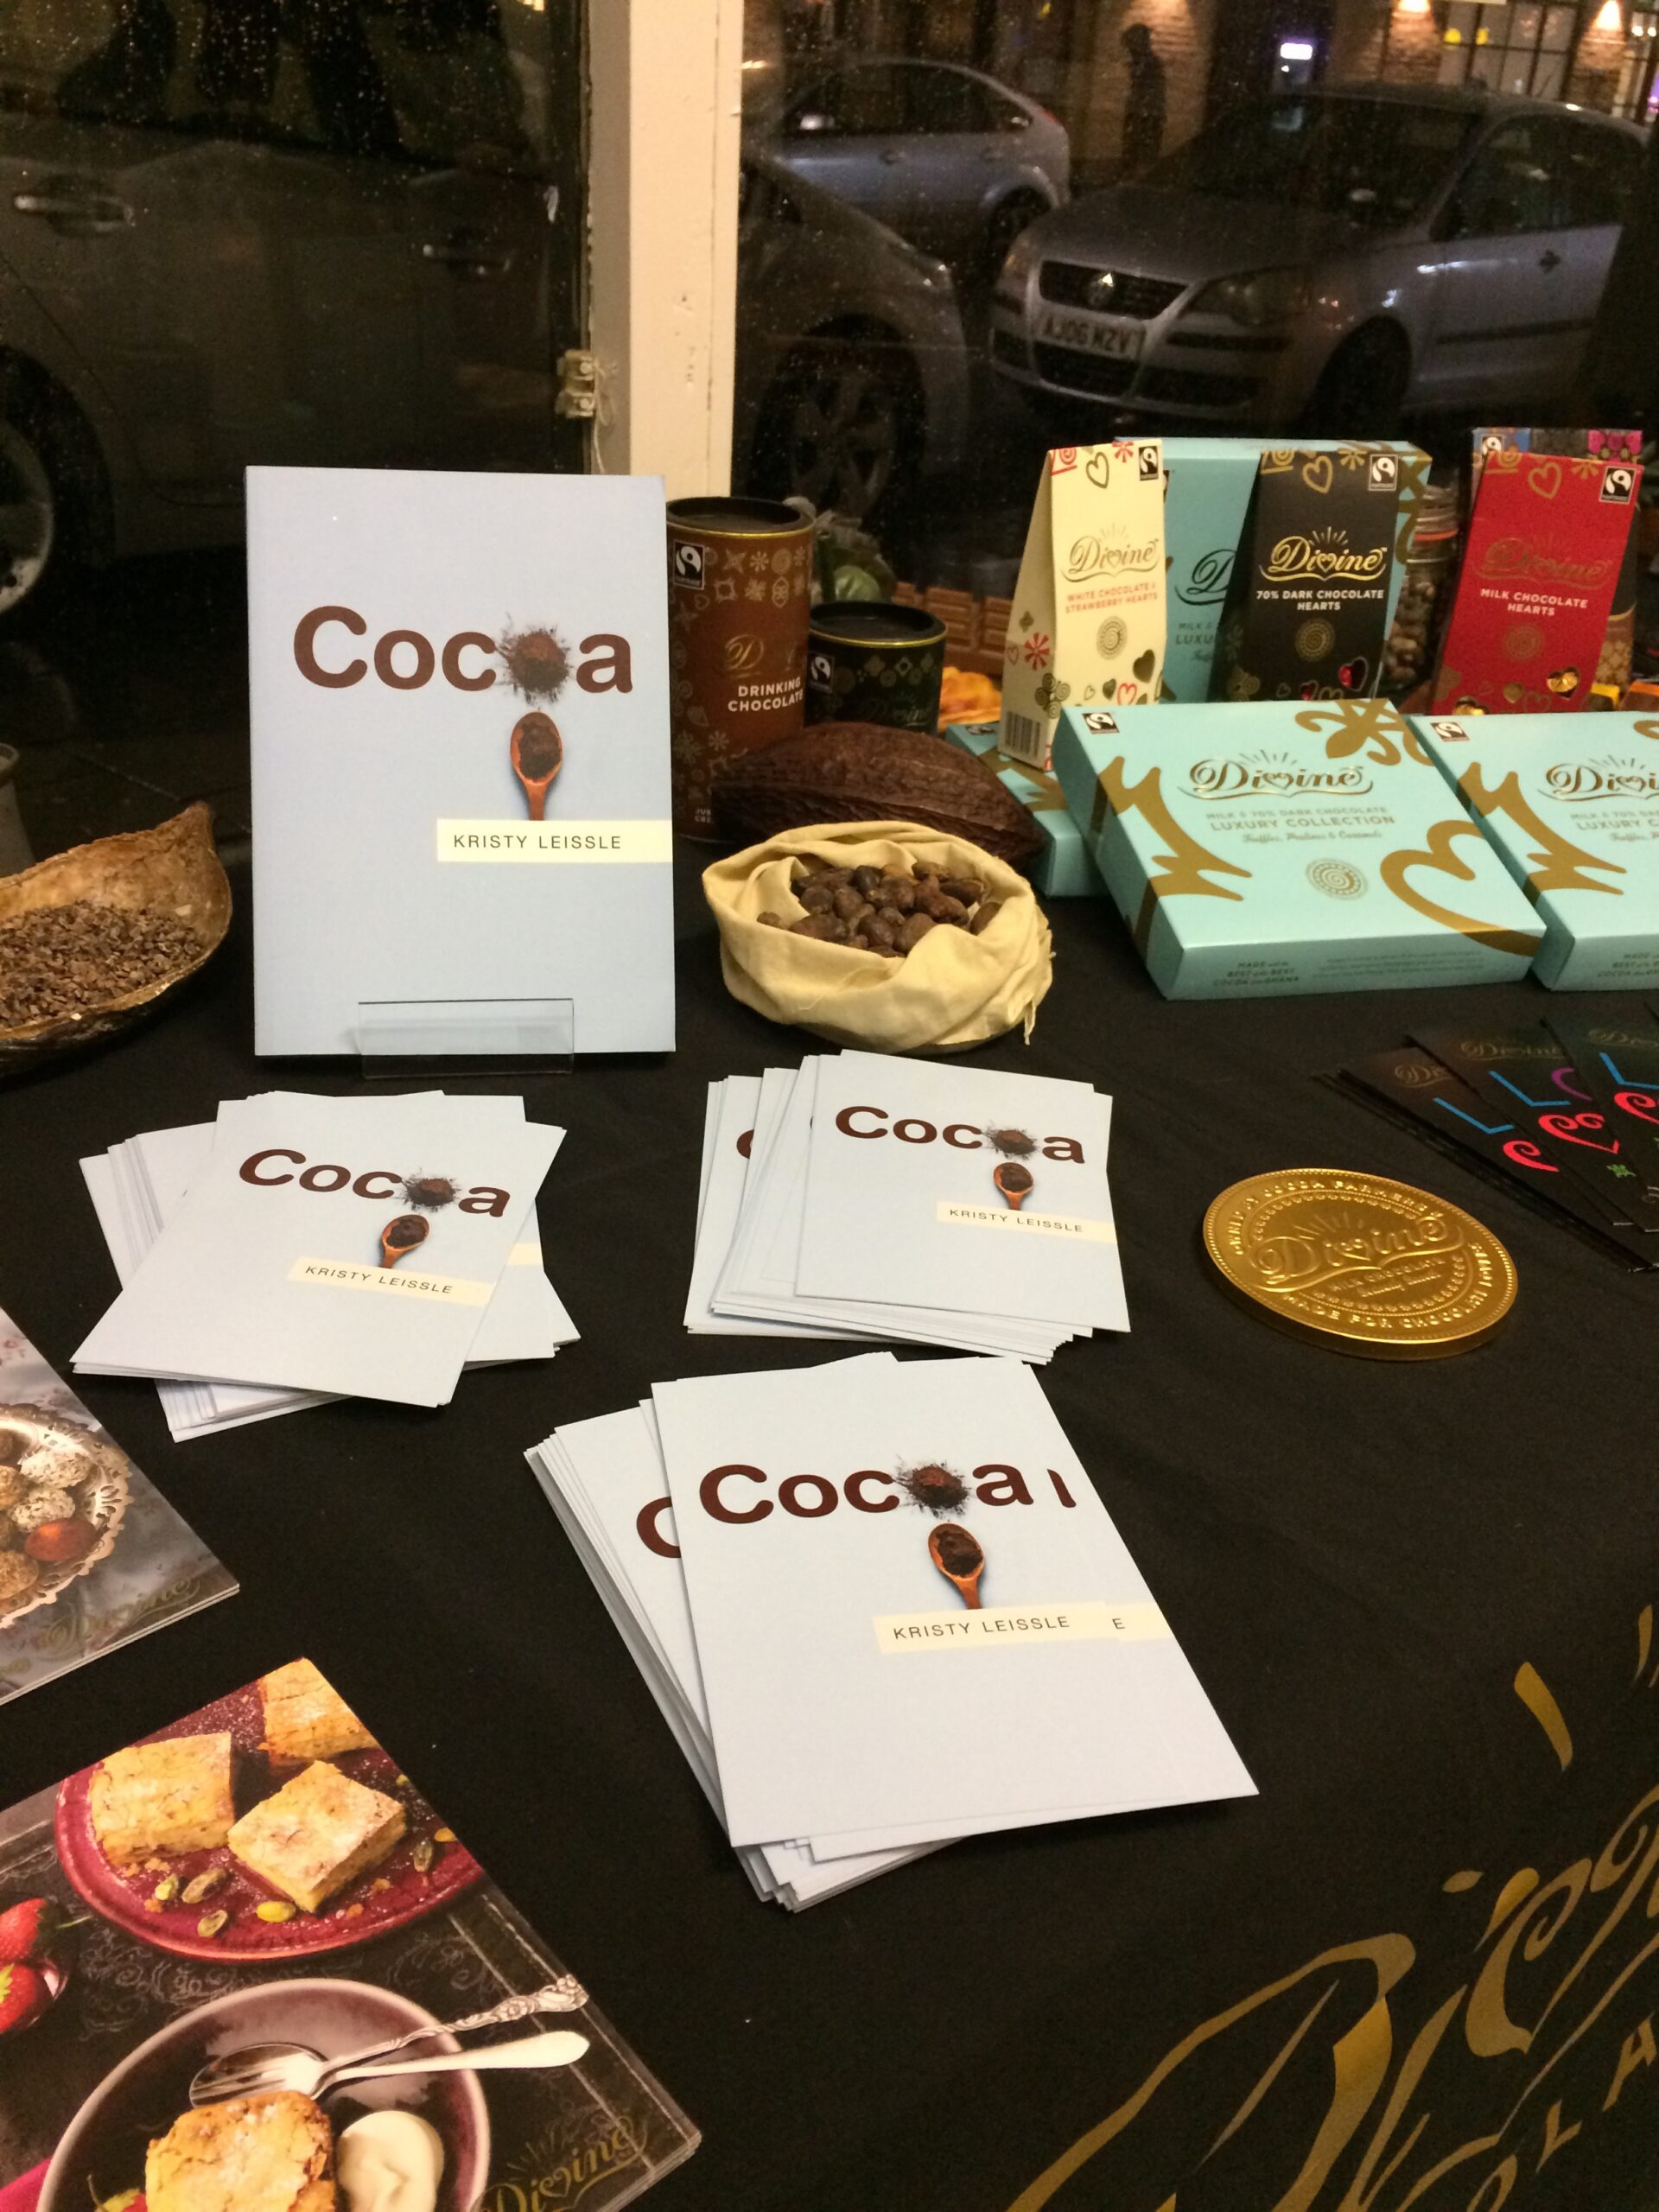 Cocoa and chocolate ready for my book launch at the Chocolate Museum